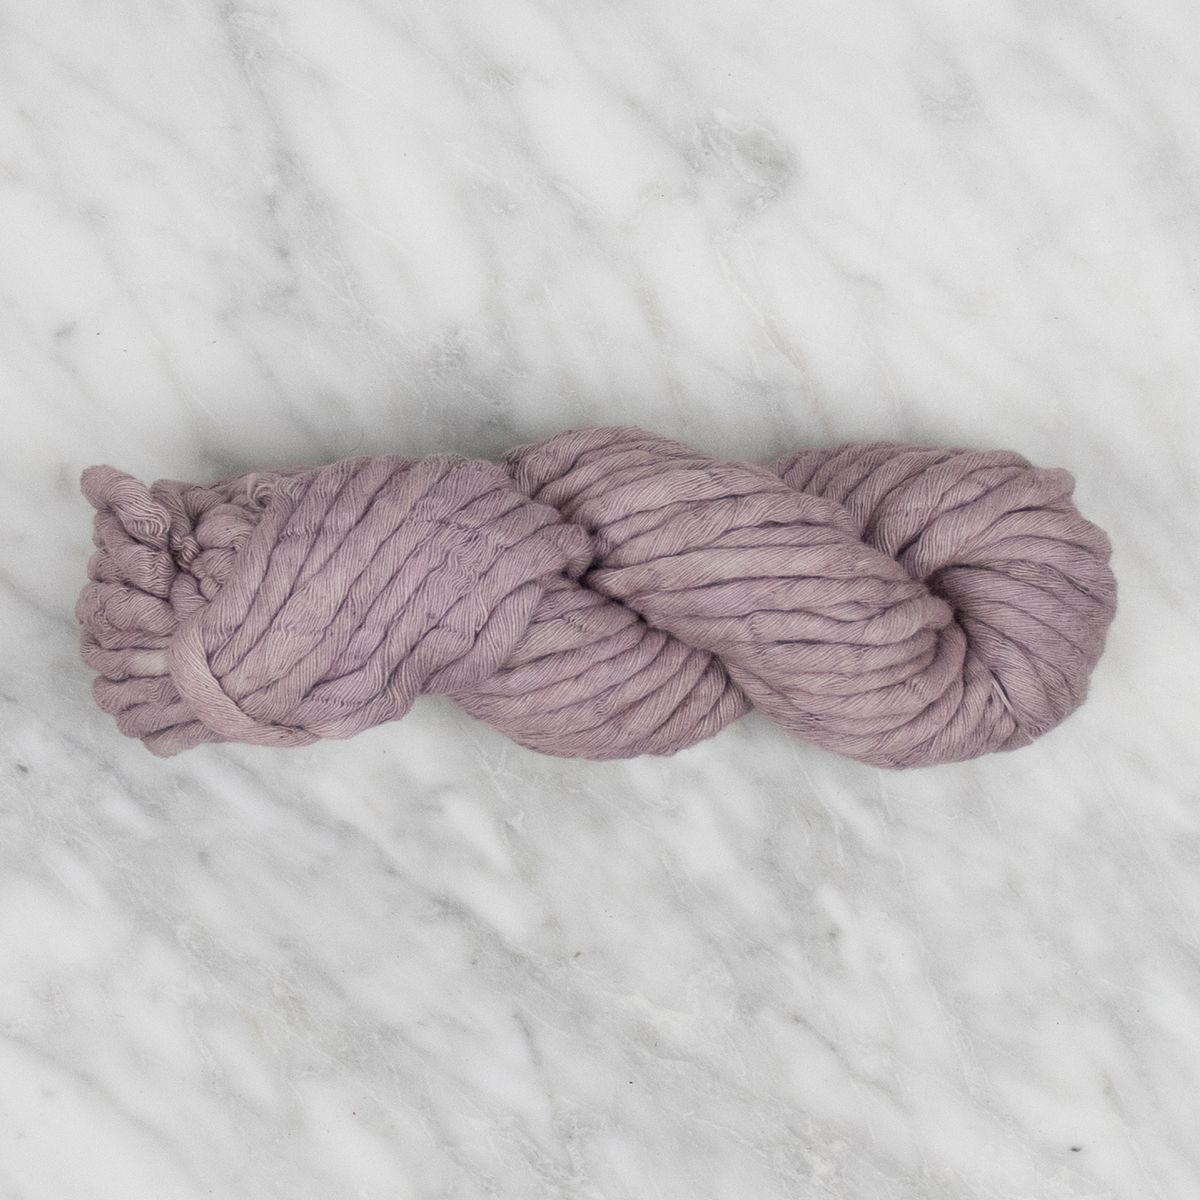 5mm Hand-Dyed Cotton String - Orchid Haze - 100 grams